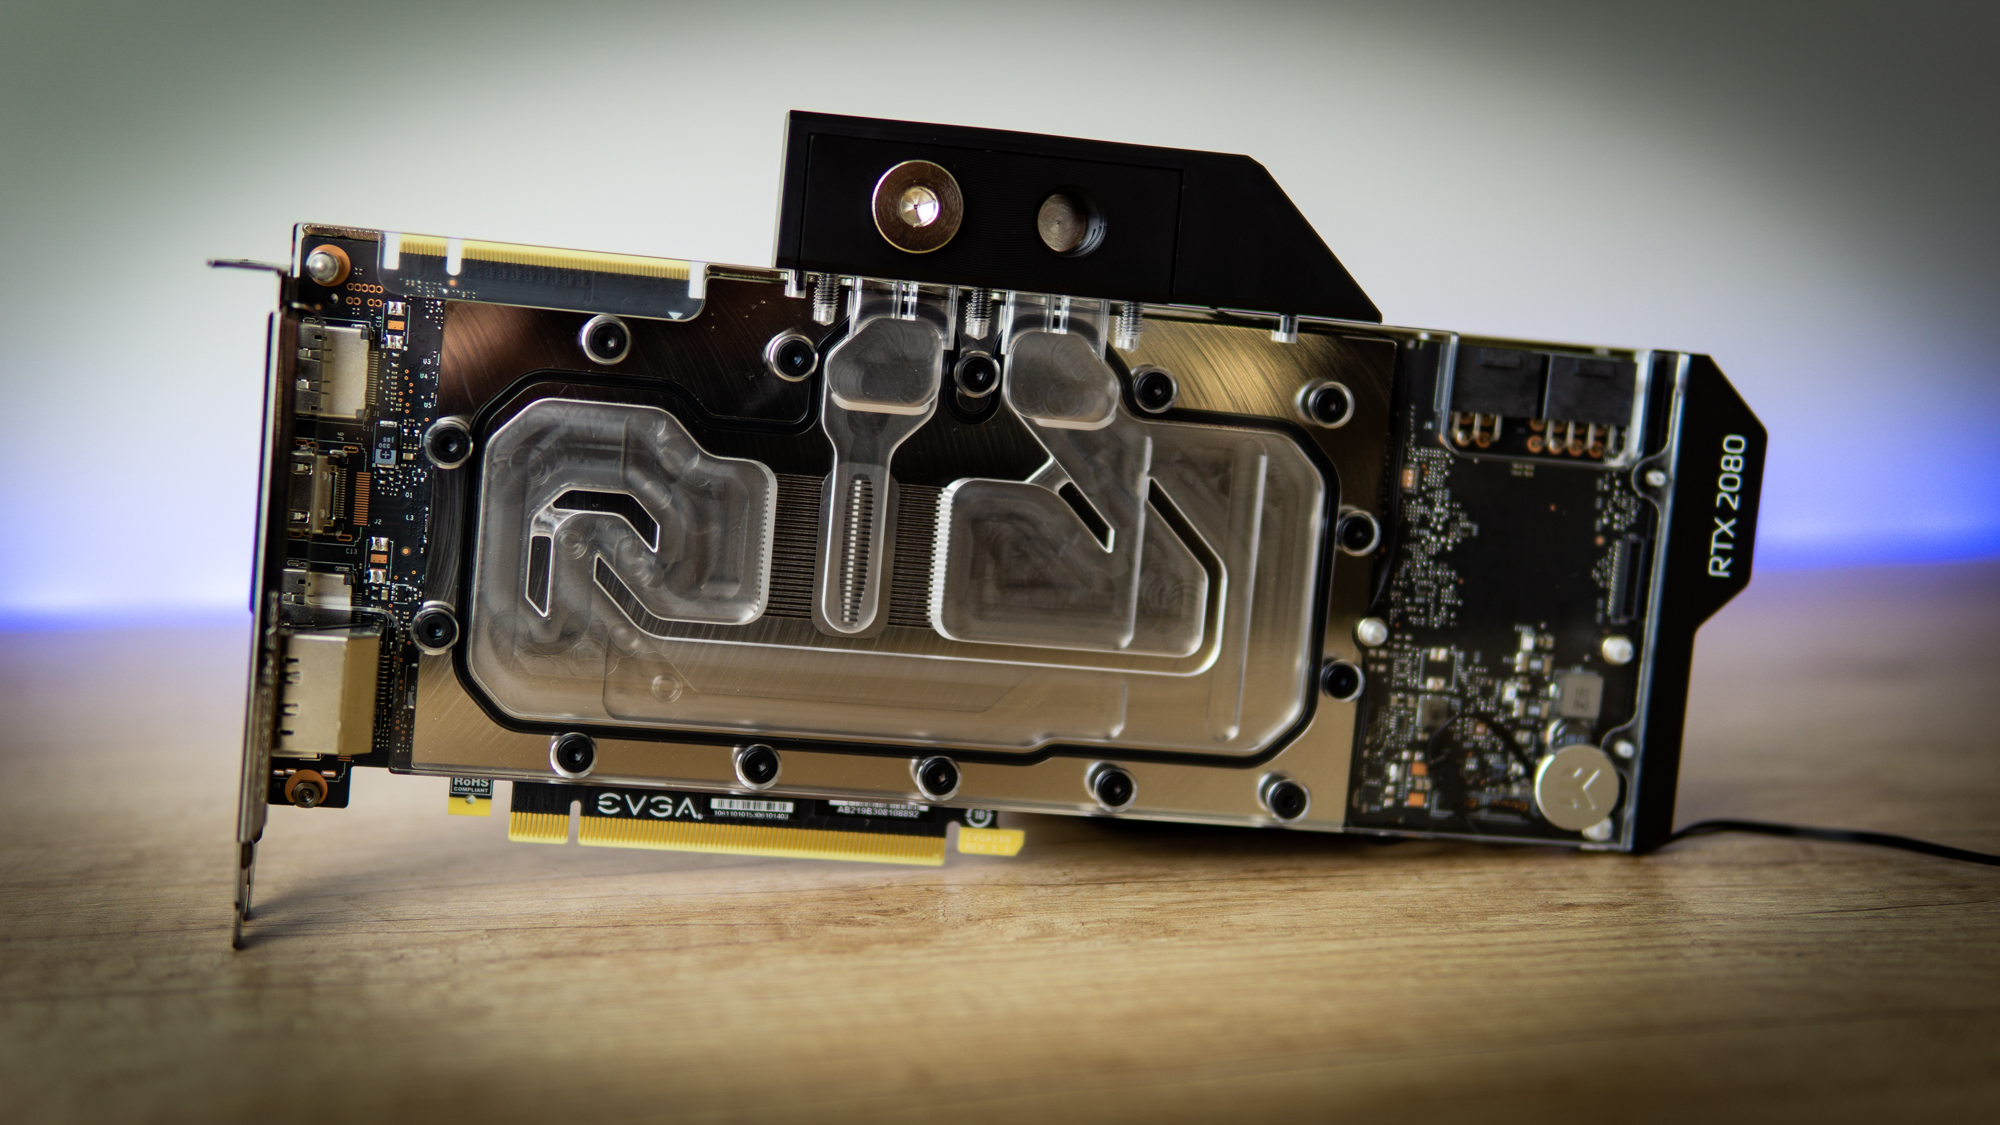 Tilskud Grundig sund fornuft How to Install a Waterblock on a GPU: Liquid Cooling Your Graphics Card |  Tom's Hardware